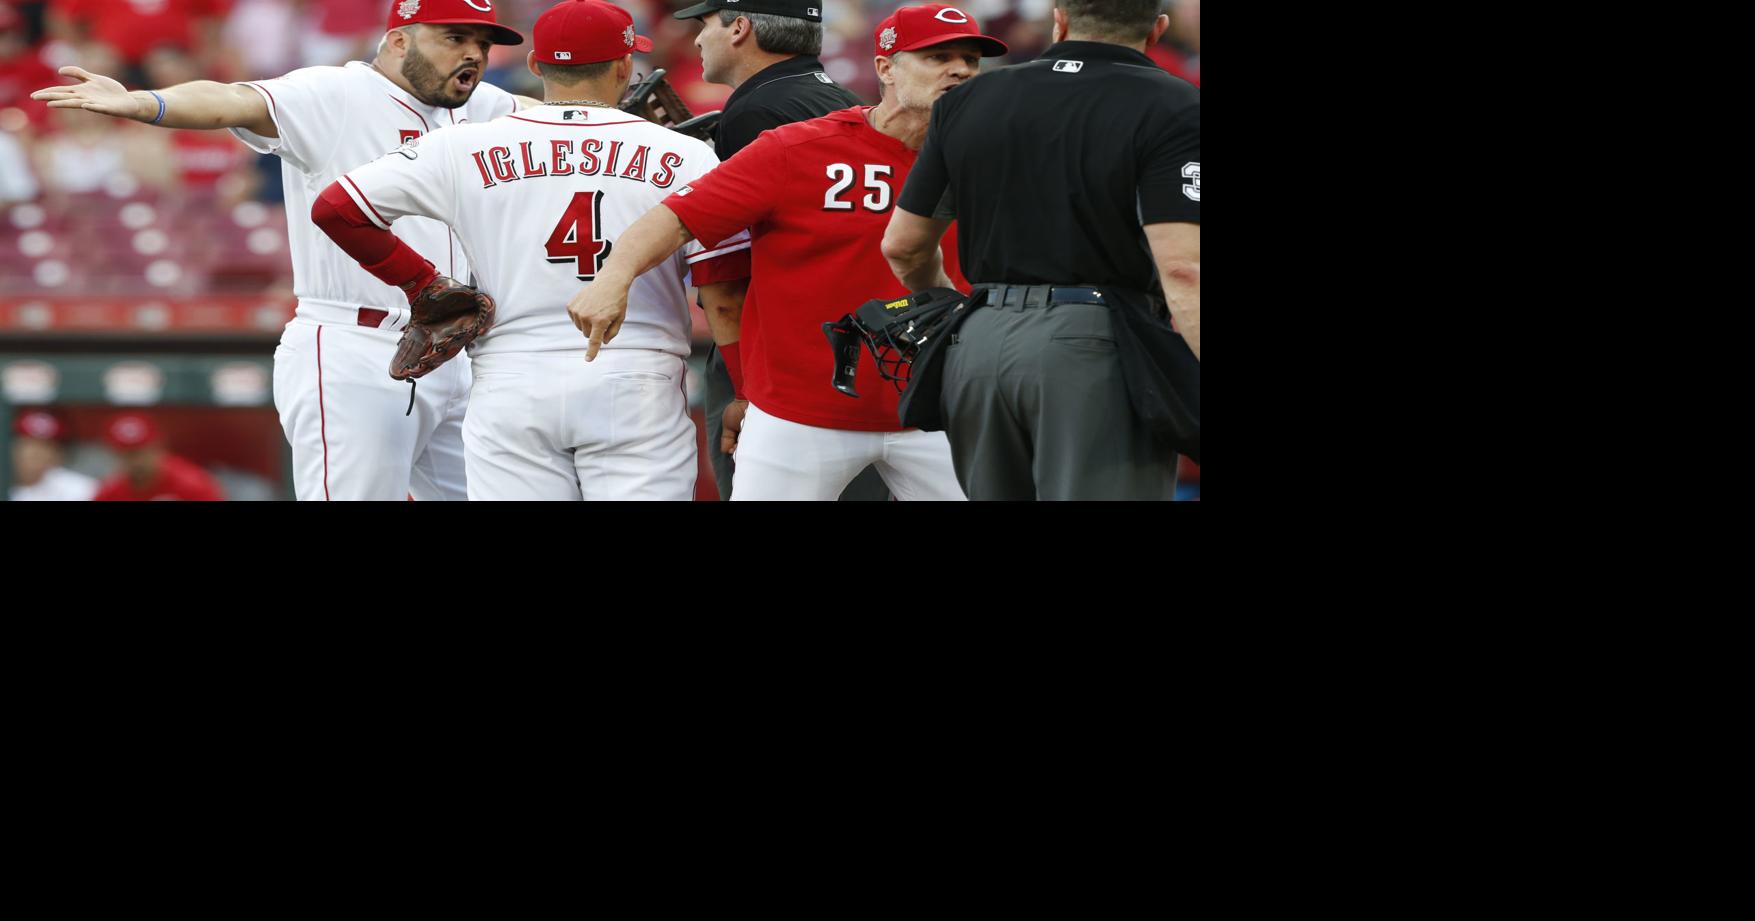 Cincinnati Reds Joey Votto says he went too far, deserved ejection by umpire  Carlos Torres